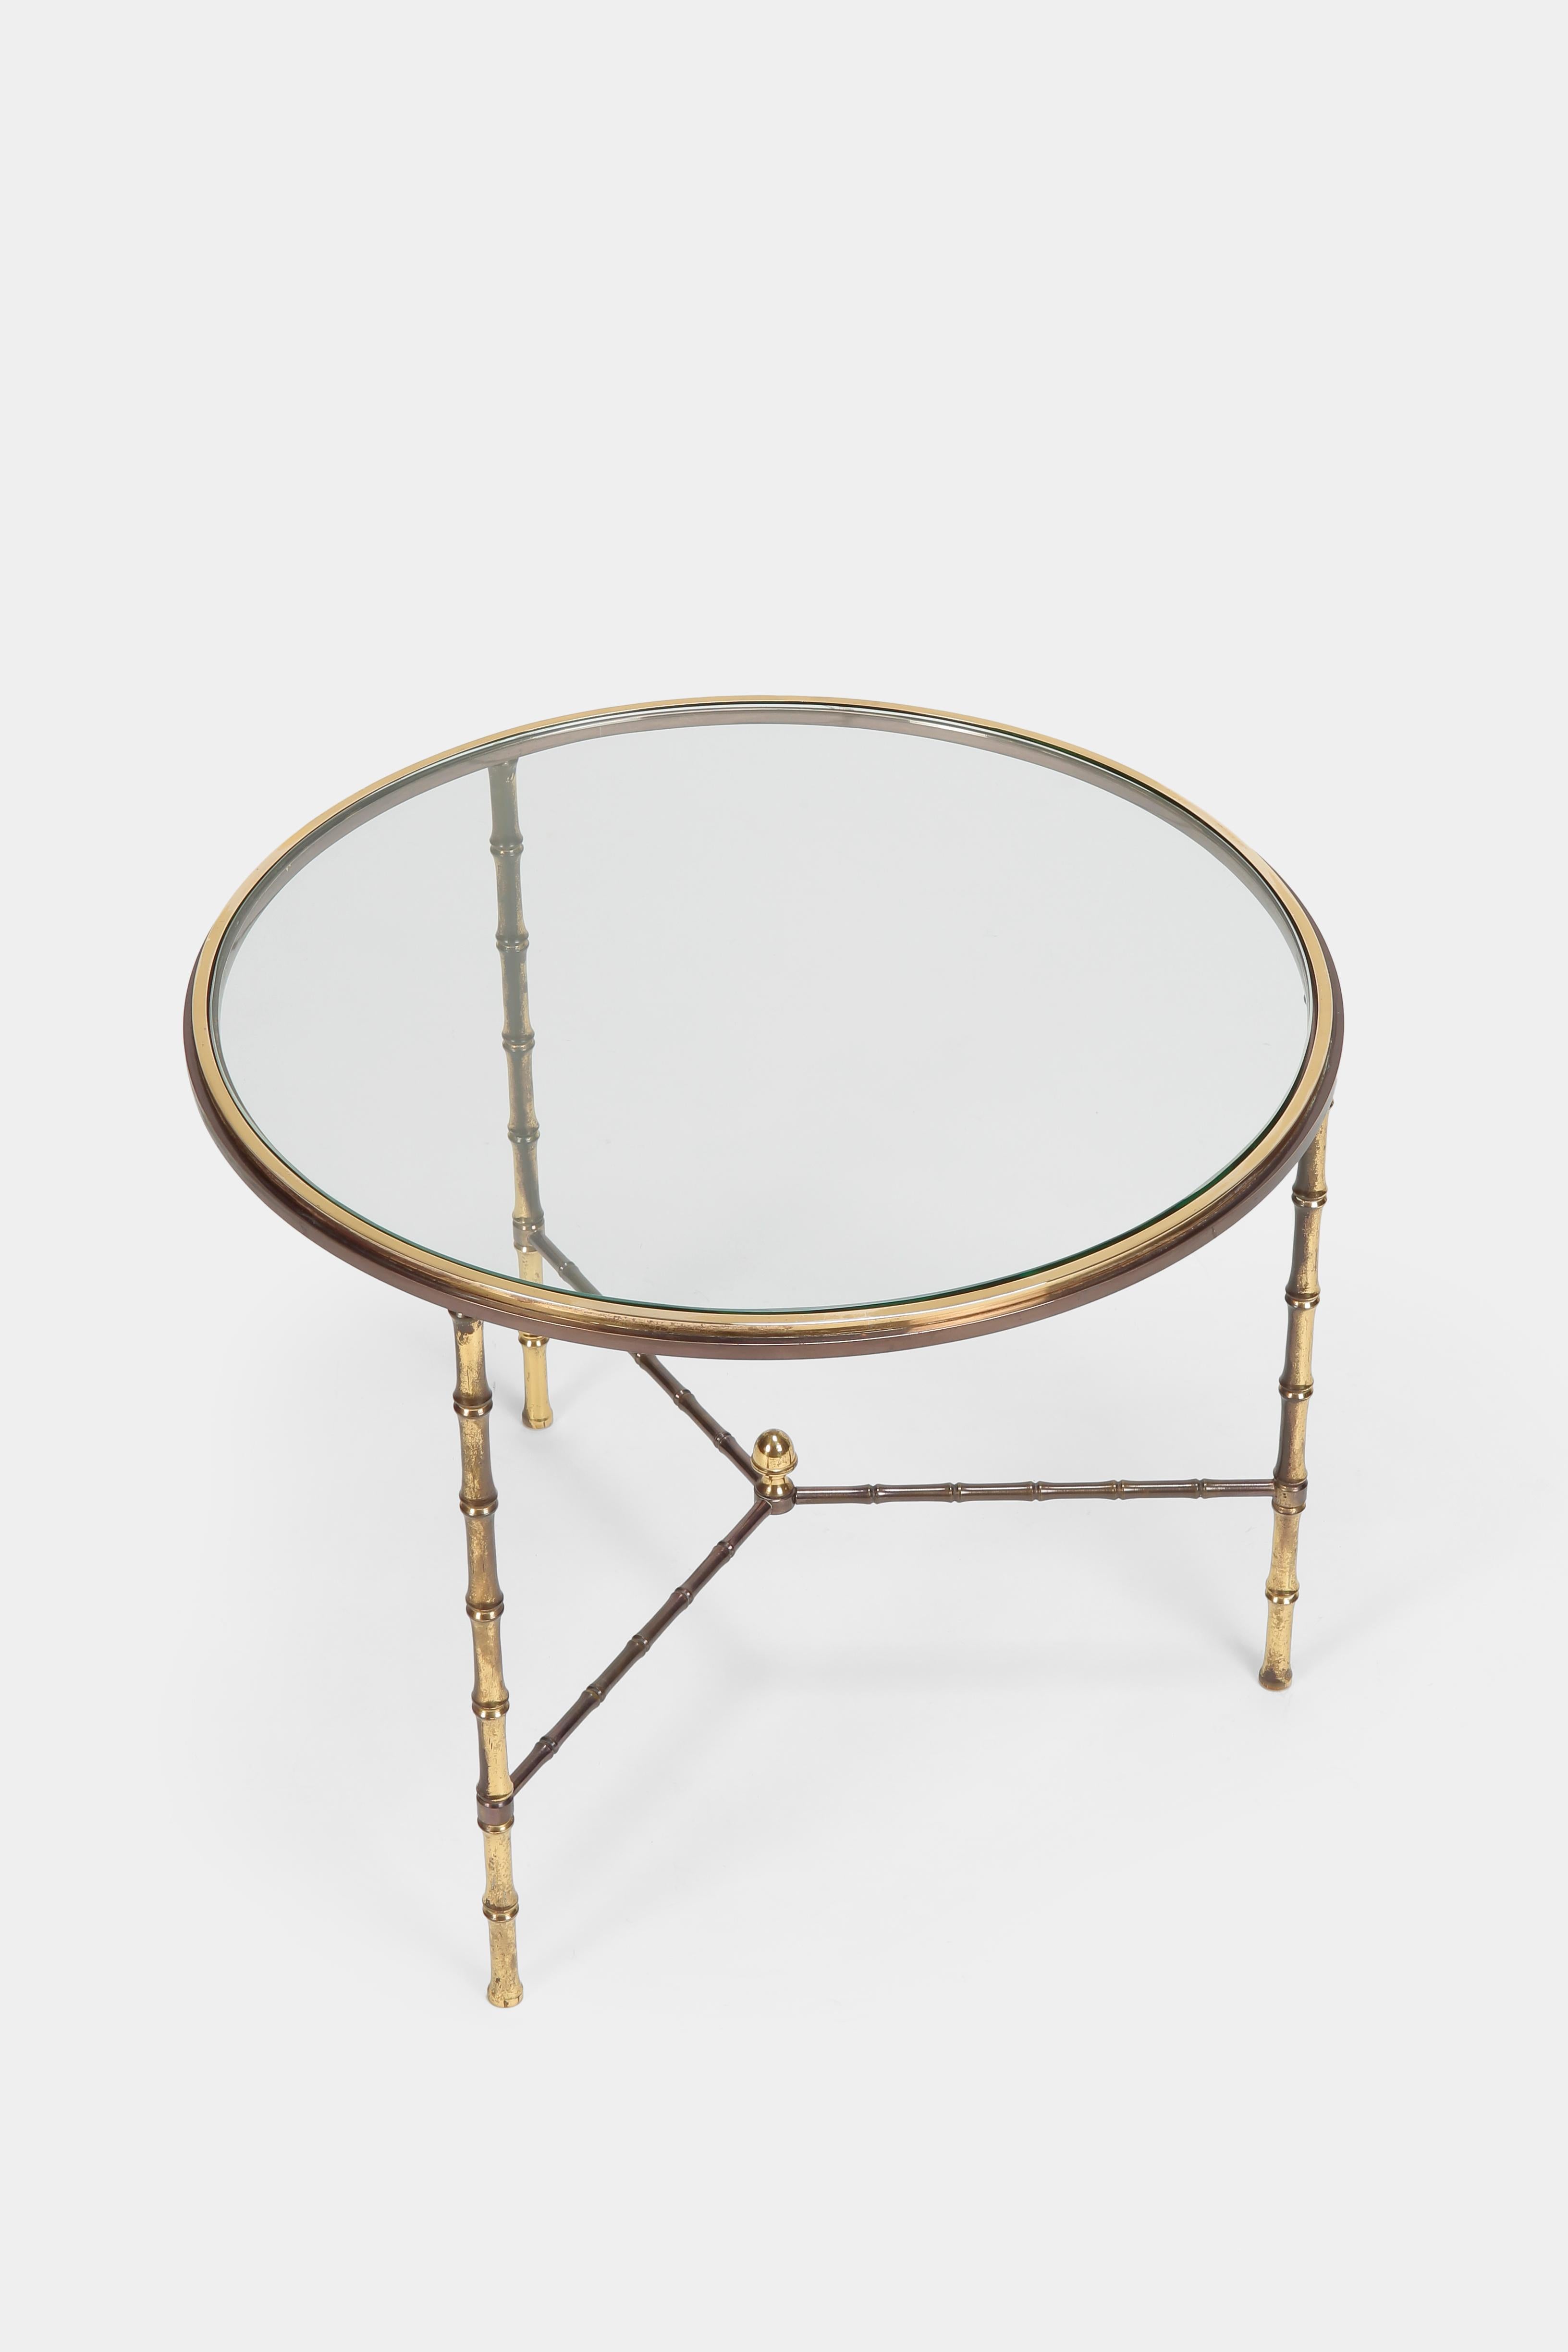 Brass round glass table from Maison Baguès made in Paris, France in the nineteen forties. Harking back to the era of Regency Moderne, also known as Hollywood Regency, this particular style is “Faux Bamboo”, a quintessentially French invention. A